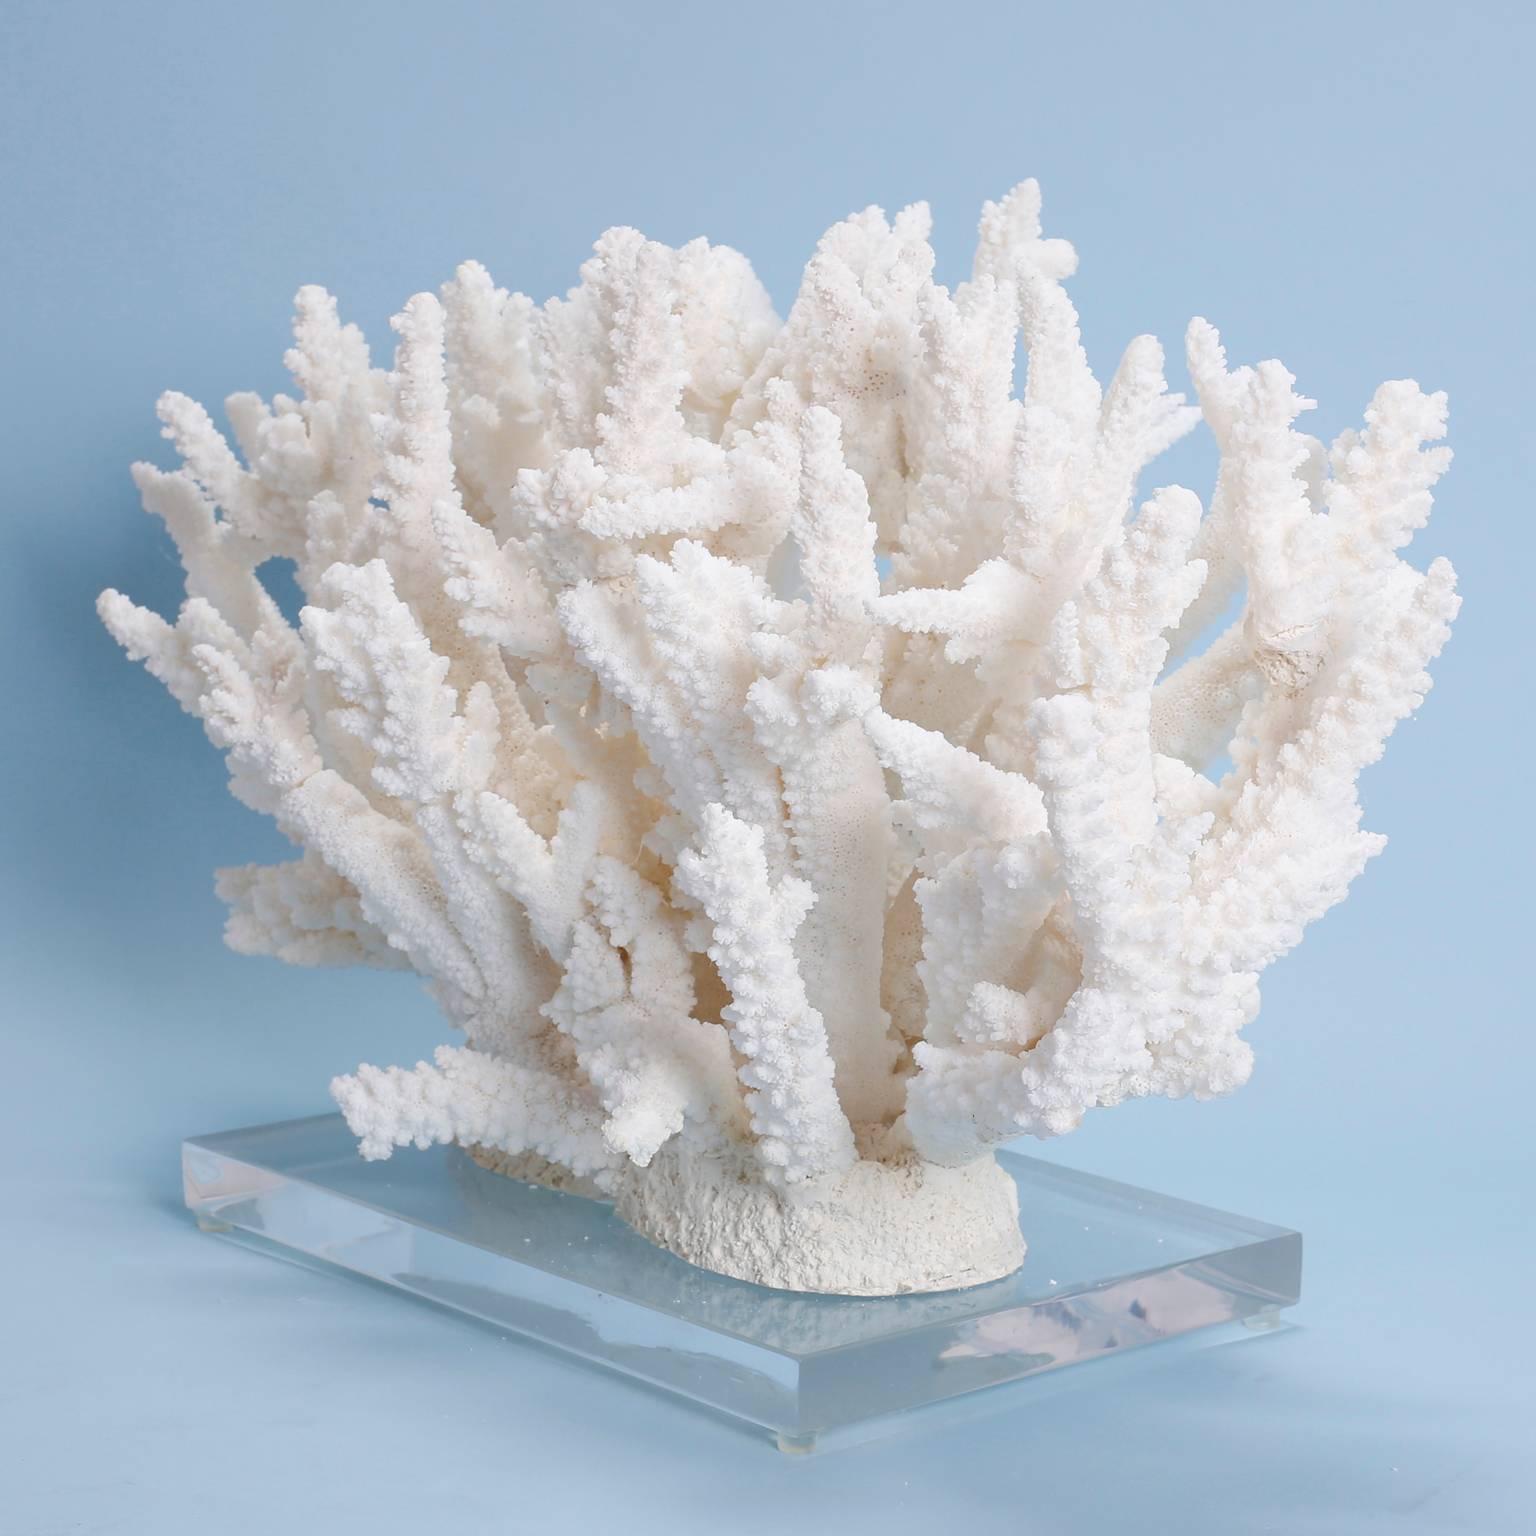 Exclusive branch coral assemblage custom designed and created by F. S. Henemader with authentic organic coral and presented on a Lucite base to enhance the sculptural elements.

Coral cannot be exported out of the USA, without Cities permits which